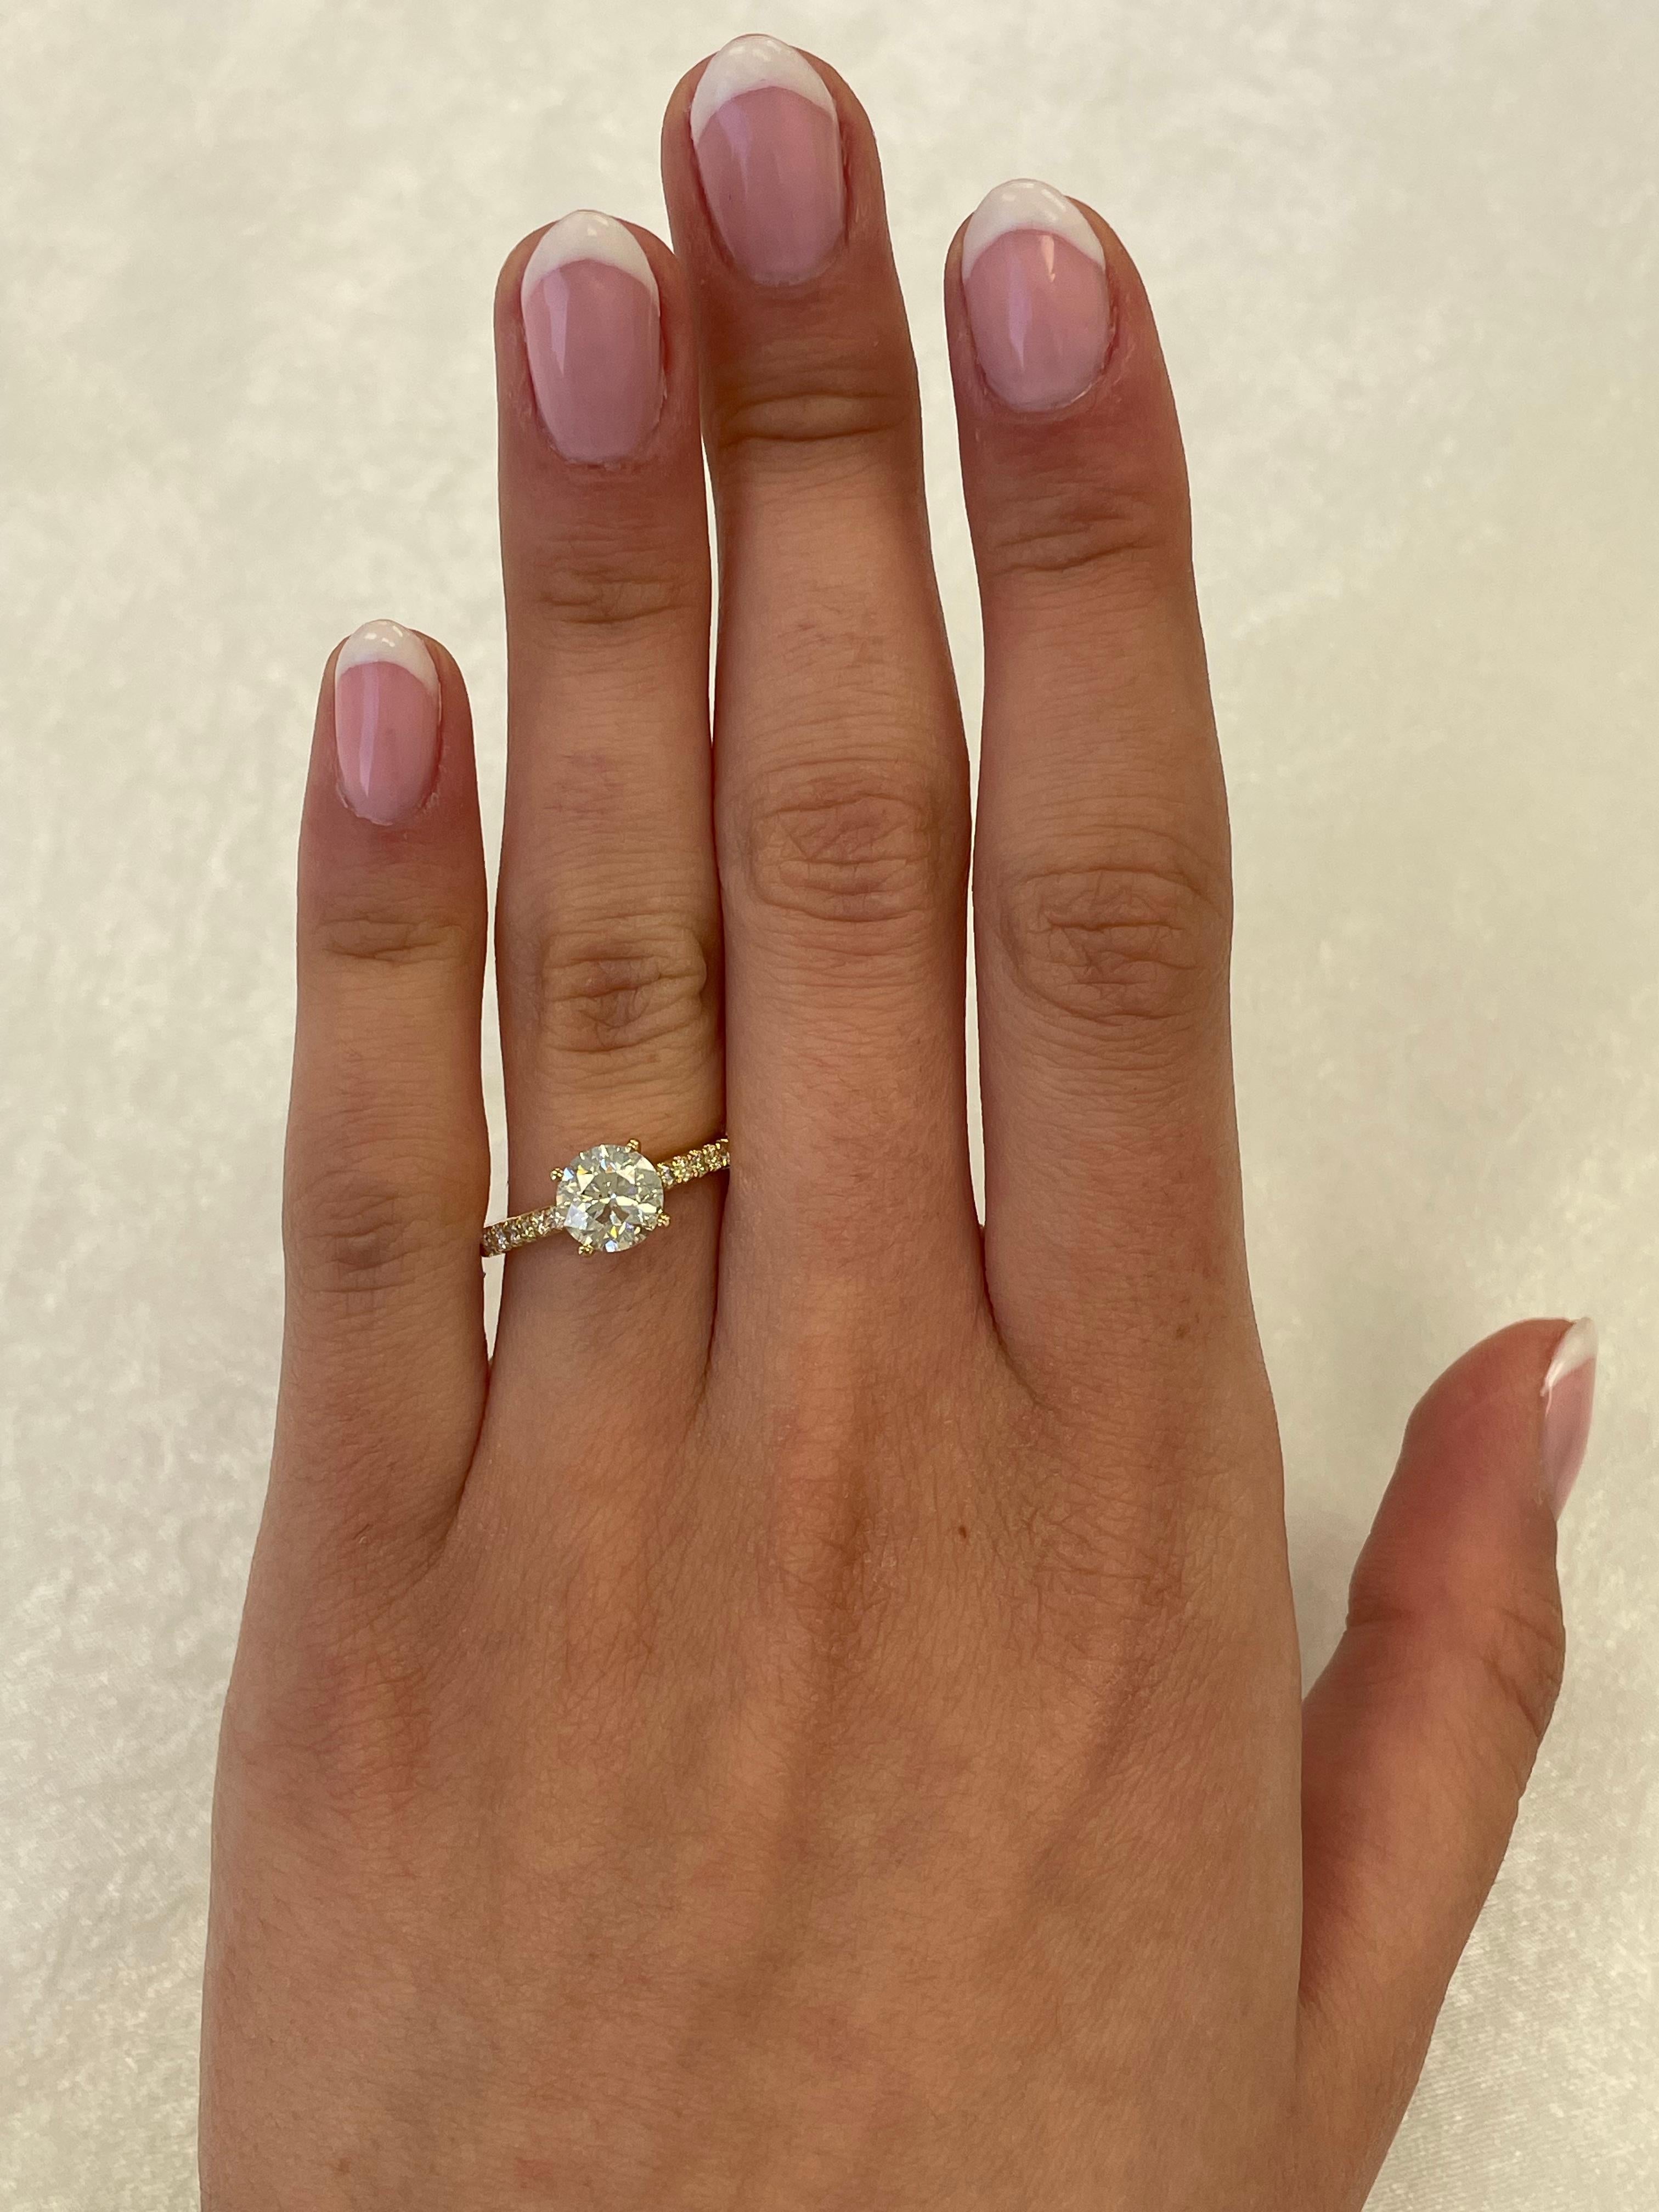 Classic solitaire diamond engagement ring with diamonds down the shank.
1.83 carats total diamond weight.
1.46 carat round brilliant diamond, approximately J color grade and SI2/I1 clarity grade. Complimented by 0.37 carats of round brilliant